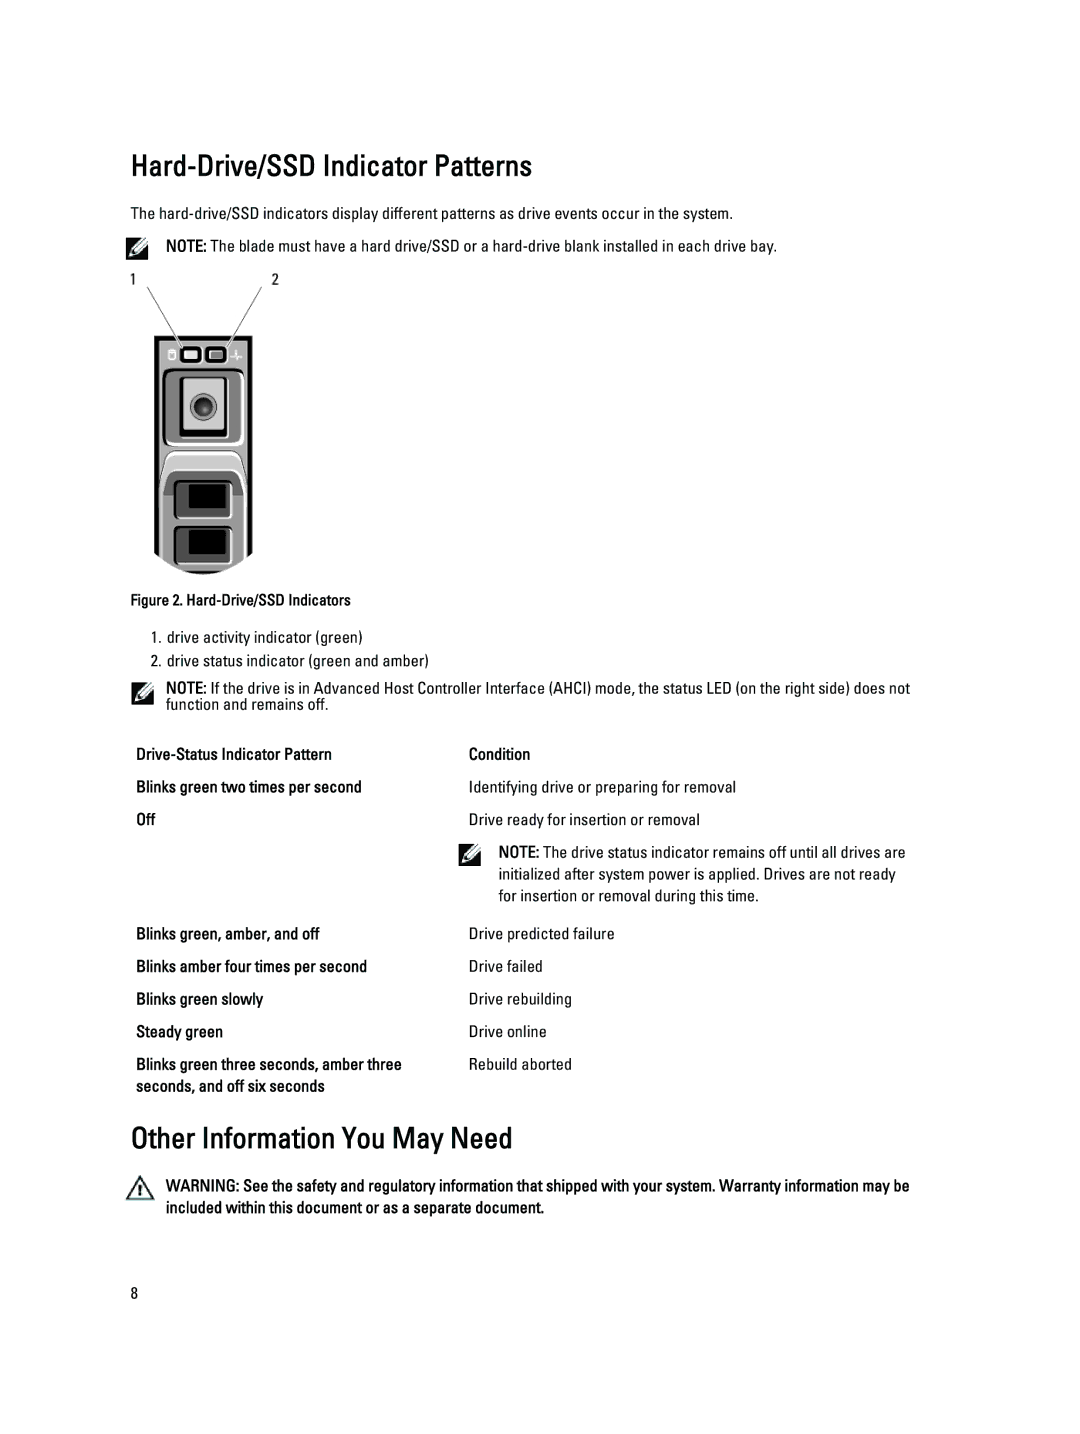 Dell M620 Hard-Drive/SSD Indicator Patterns, Other Information You May Need, For insertion or removal during this time 